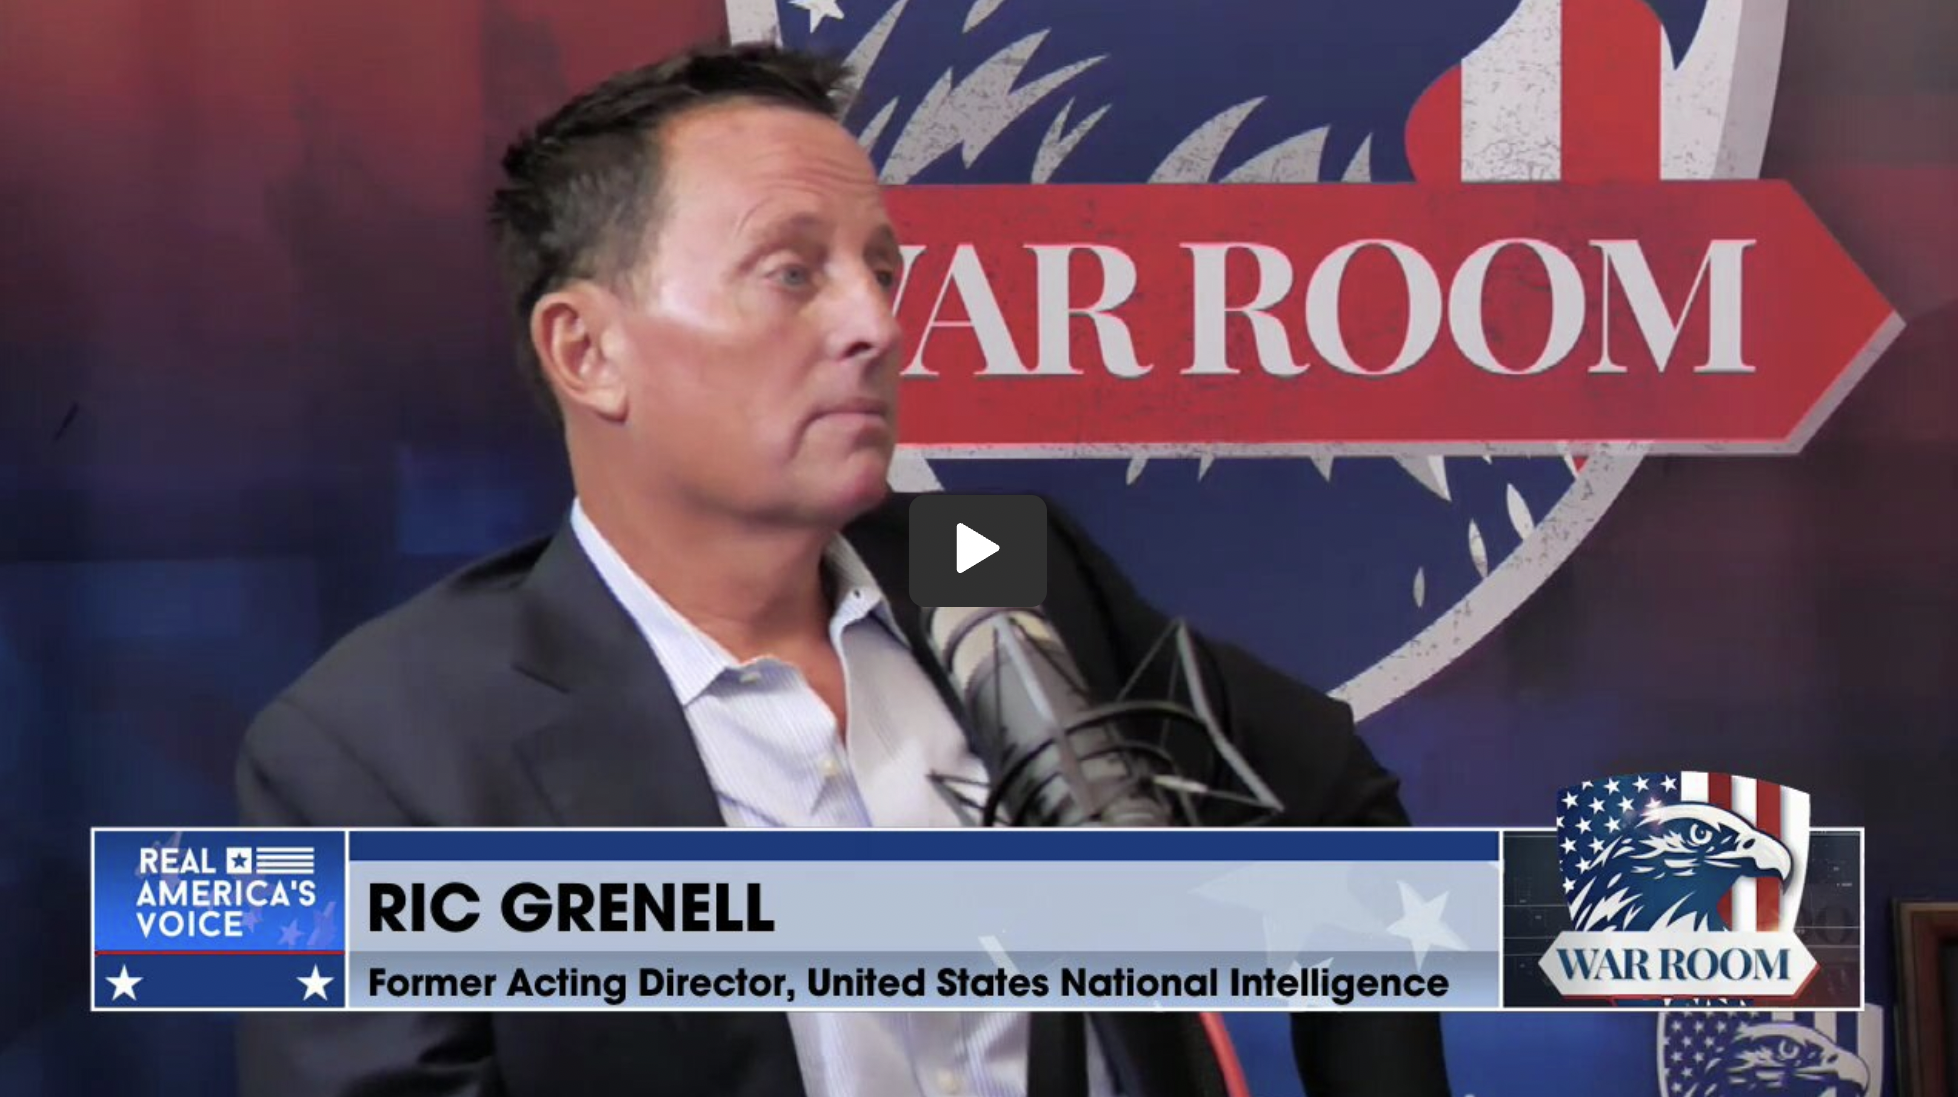 Richard Grenell: Calling Out The Failures Of The State Department